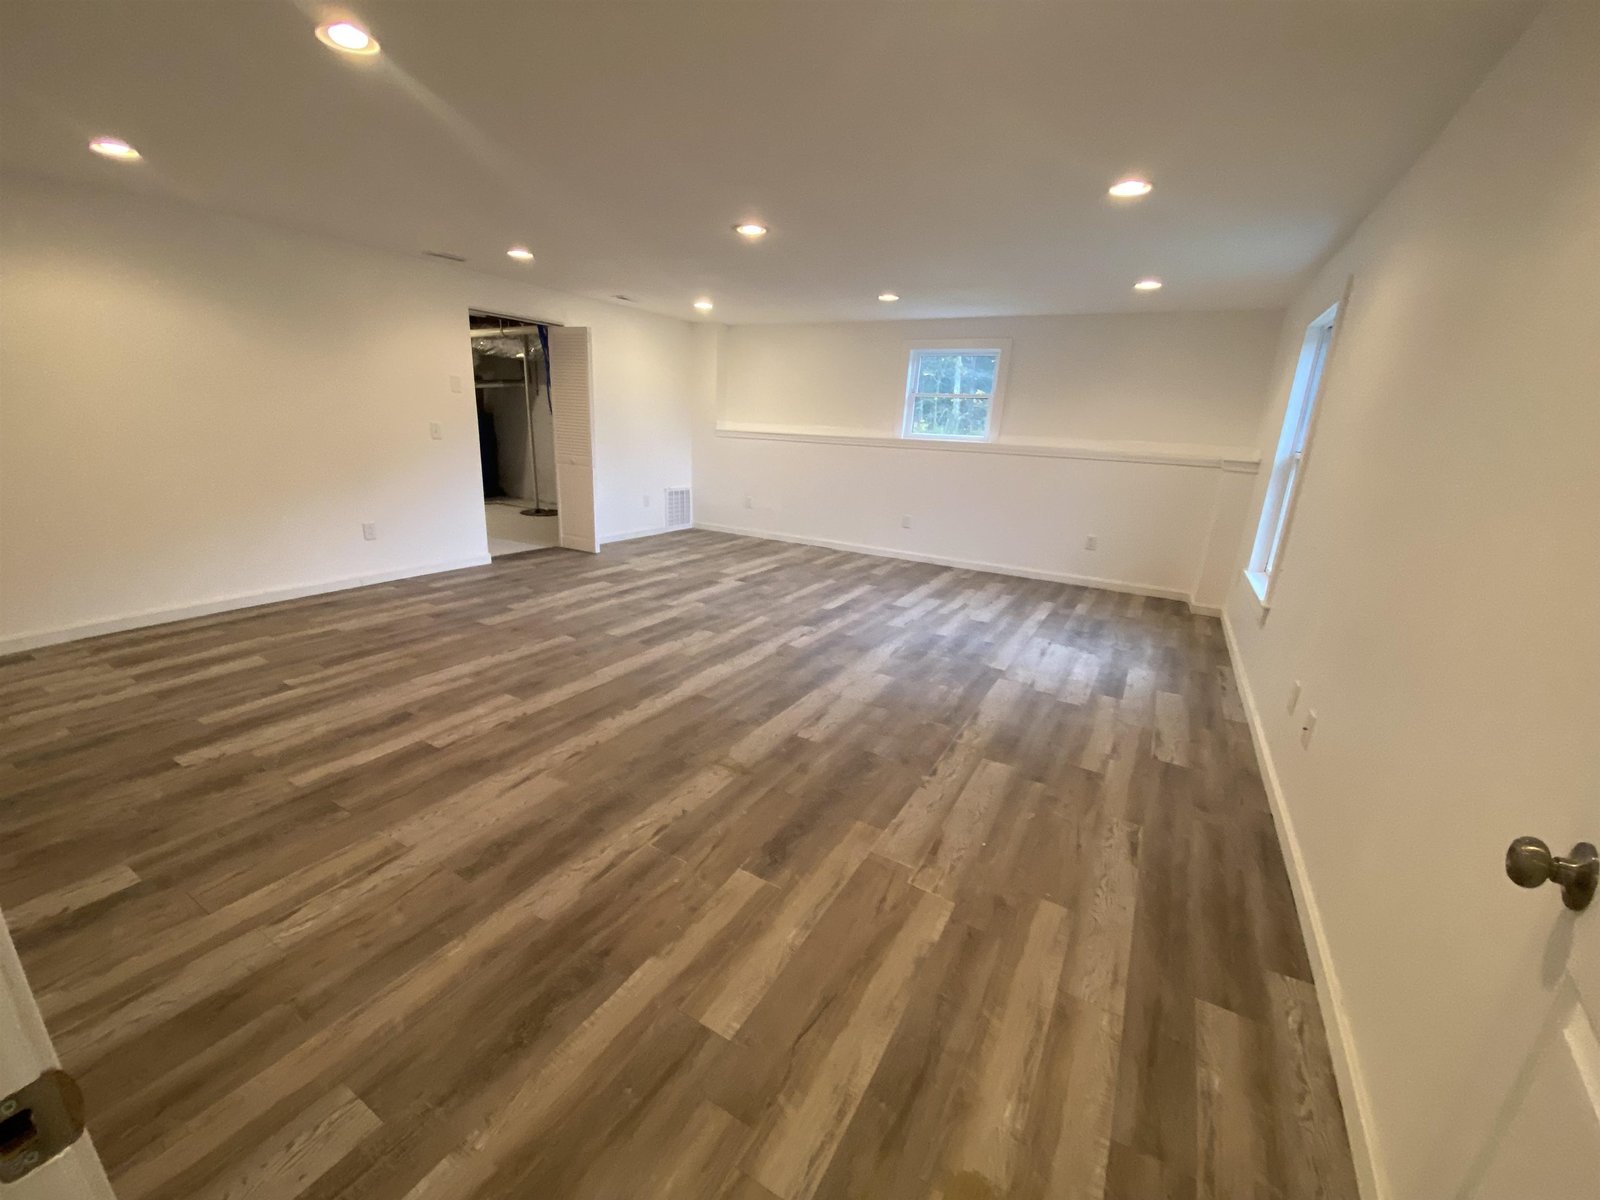 Two large rooms in finished walk-out basement